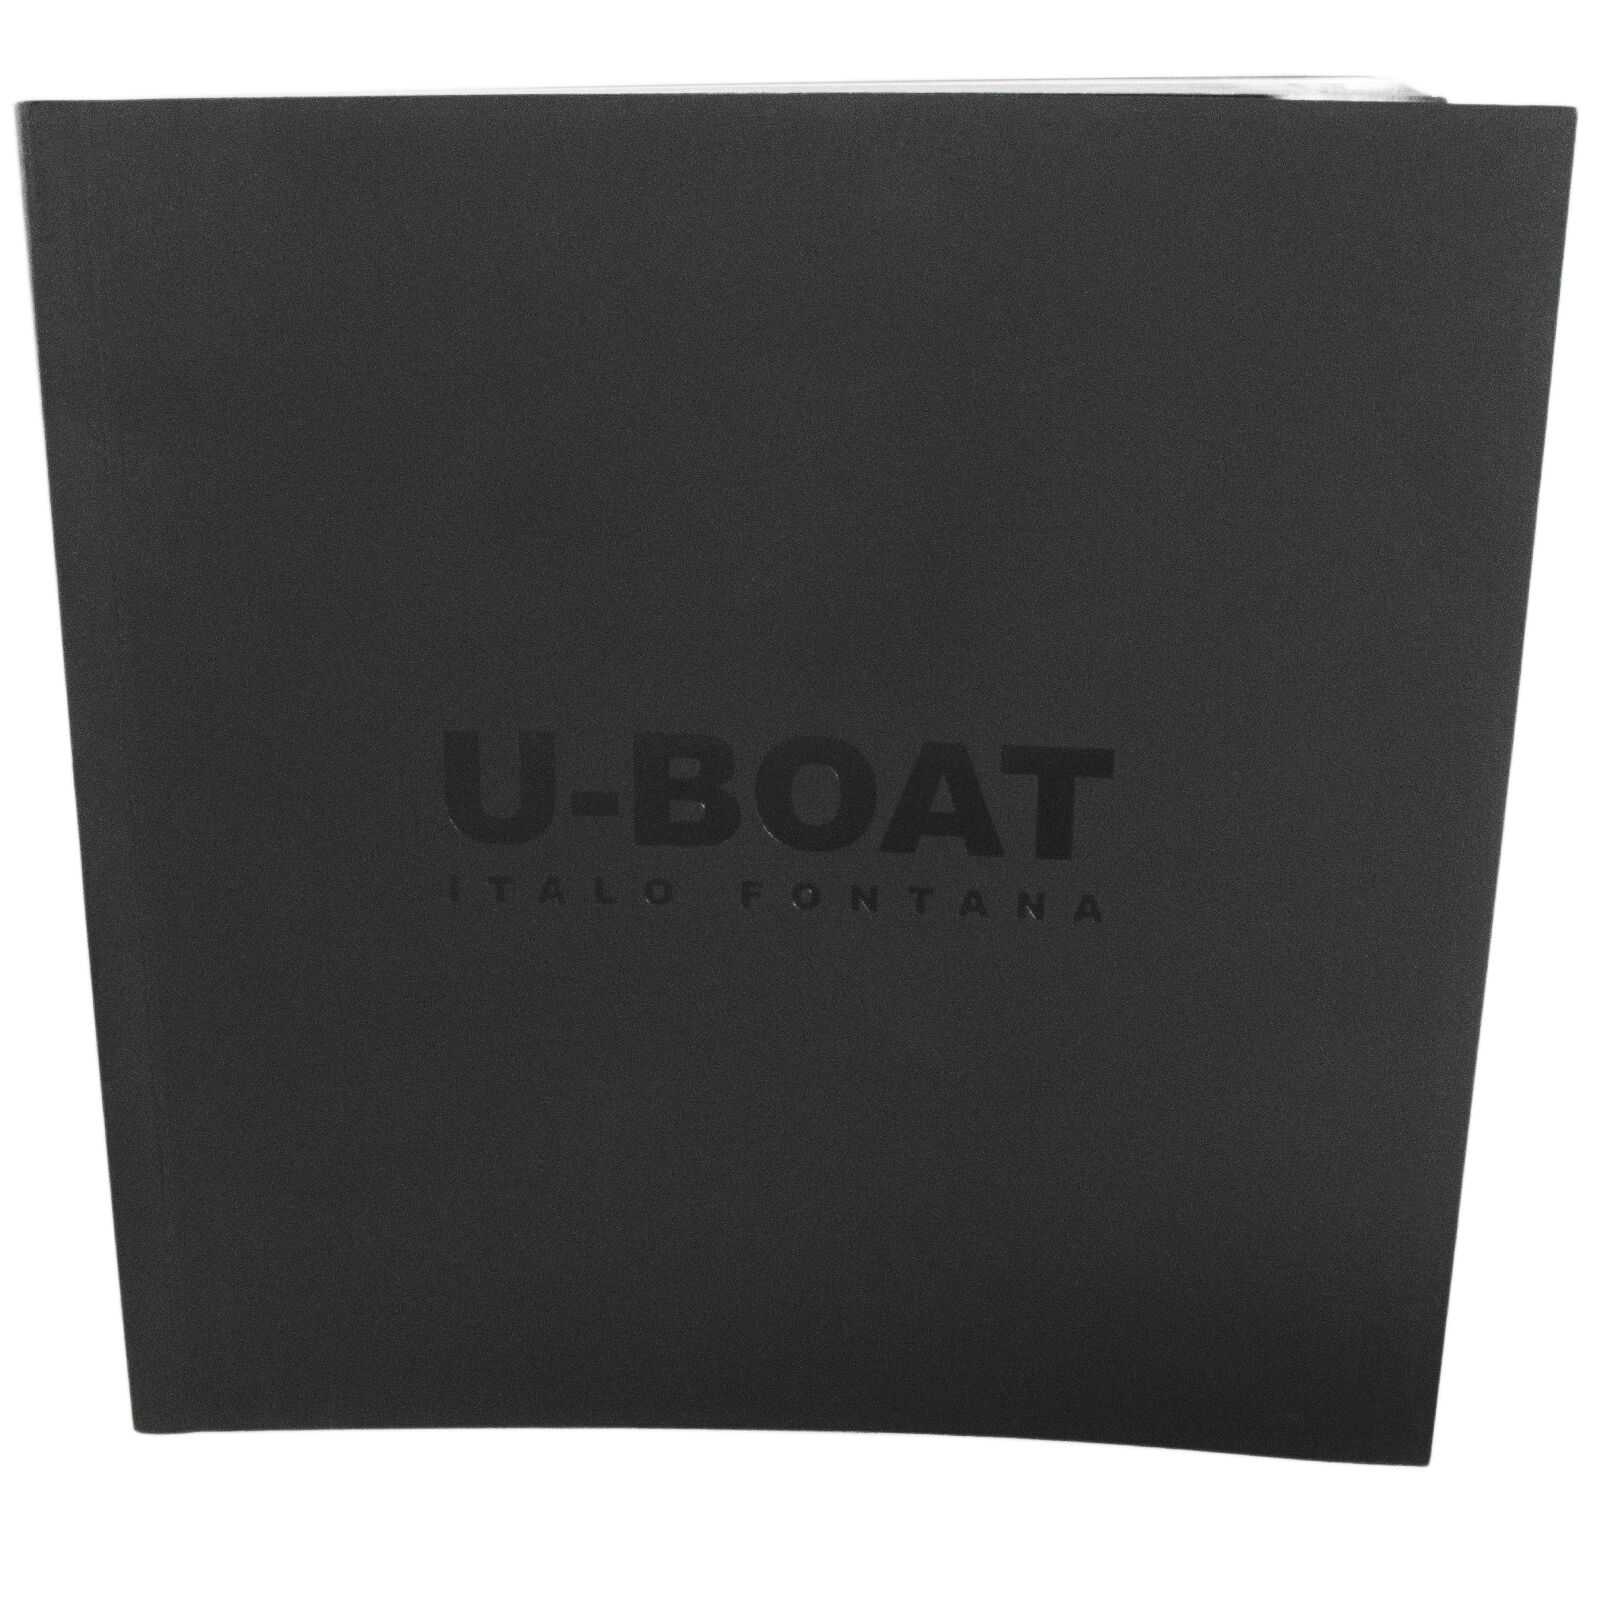 U-Boat History and Product Book